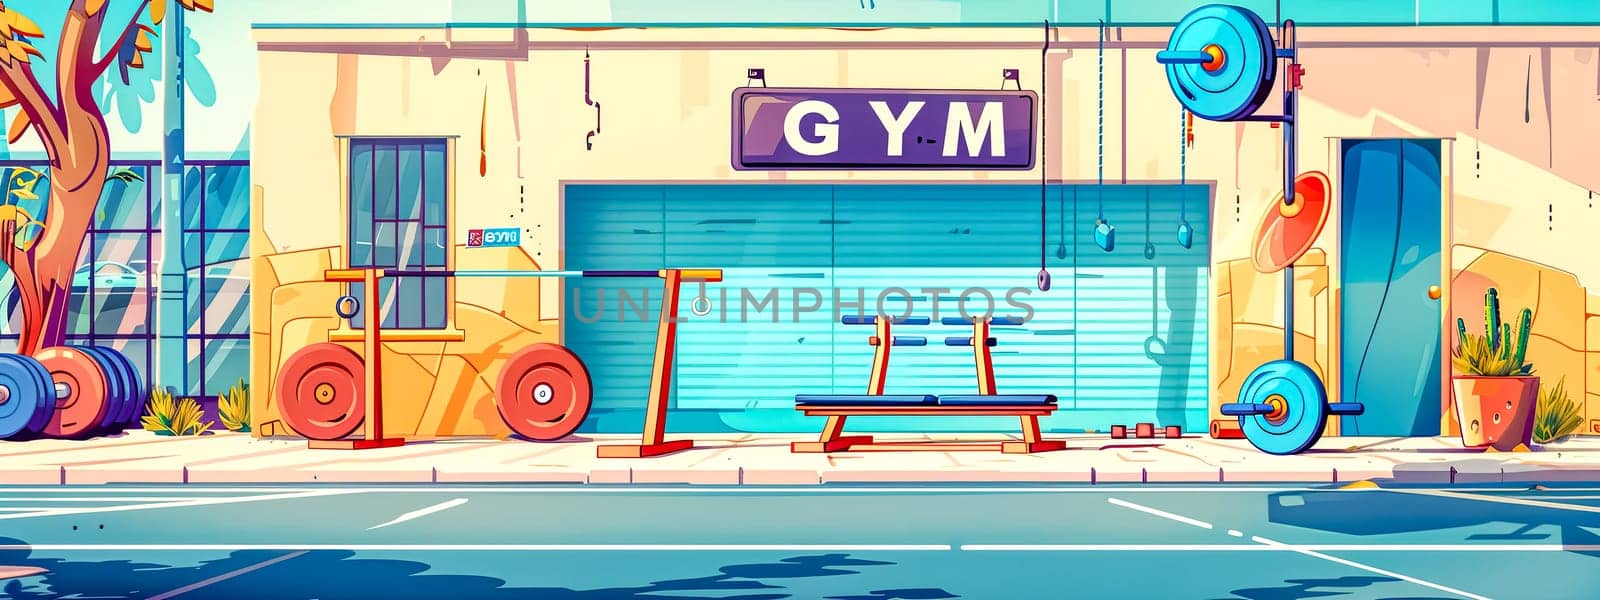 Colorful cartoon gym exterior with workout equipment by Edophoto